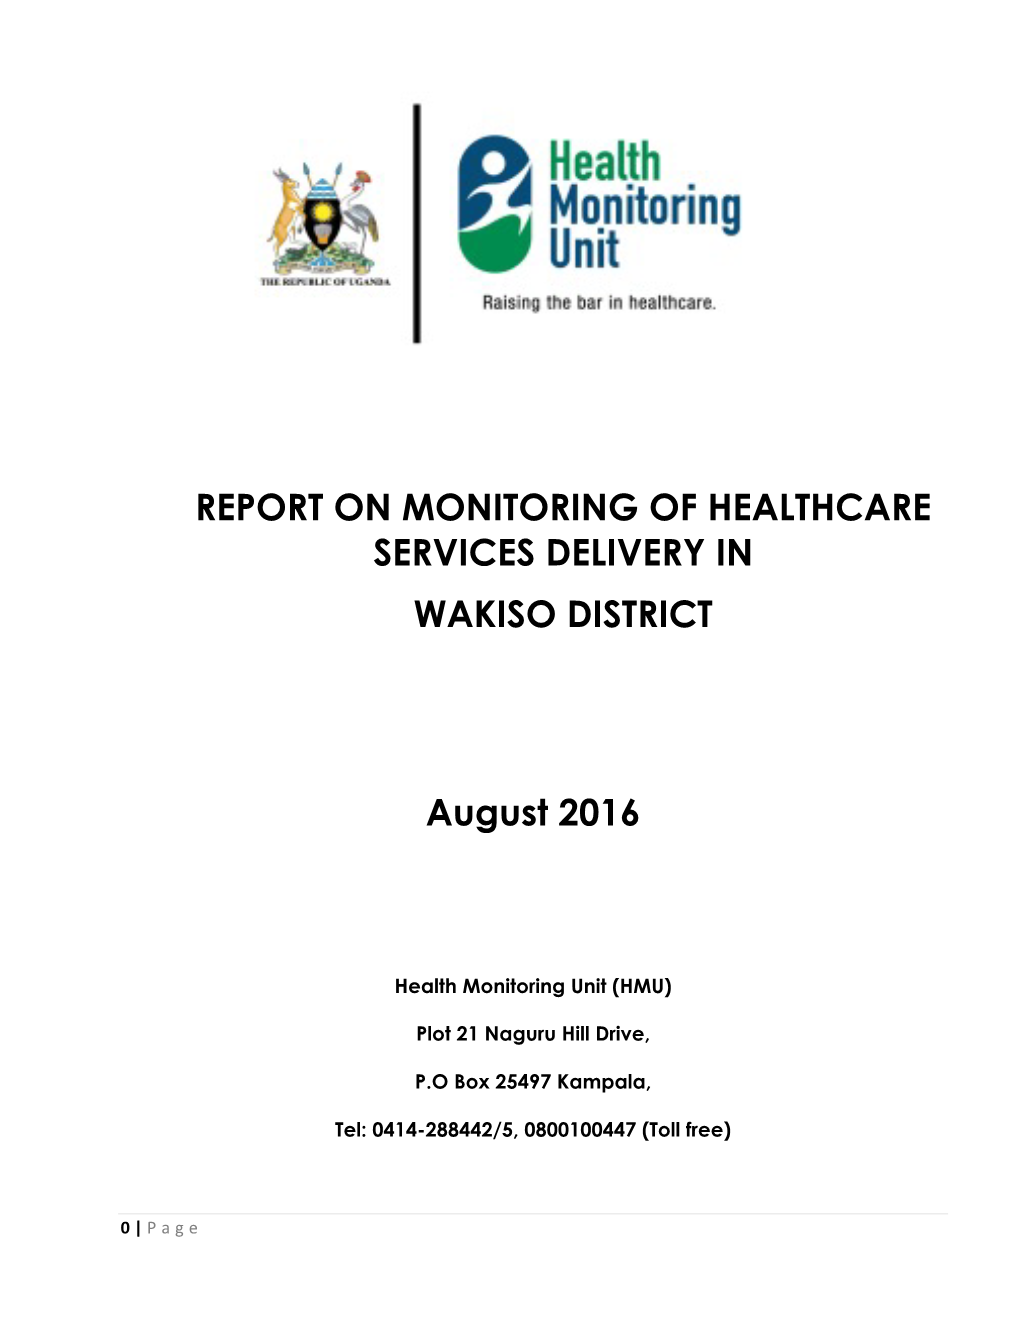 Report on Monitoring of Healthcare Services Delivery in Wakiso District